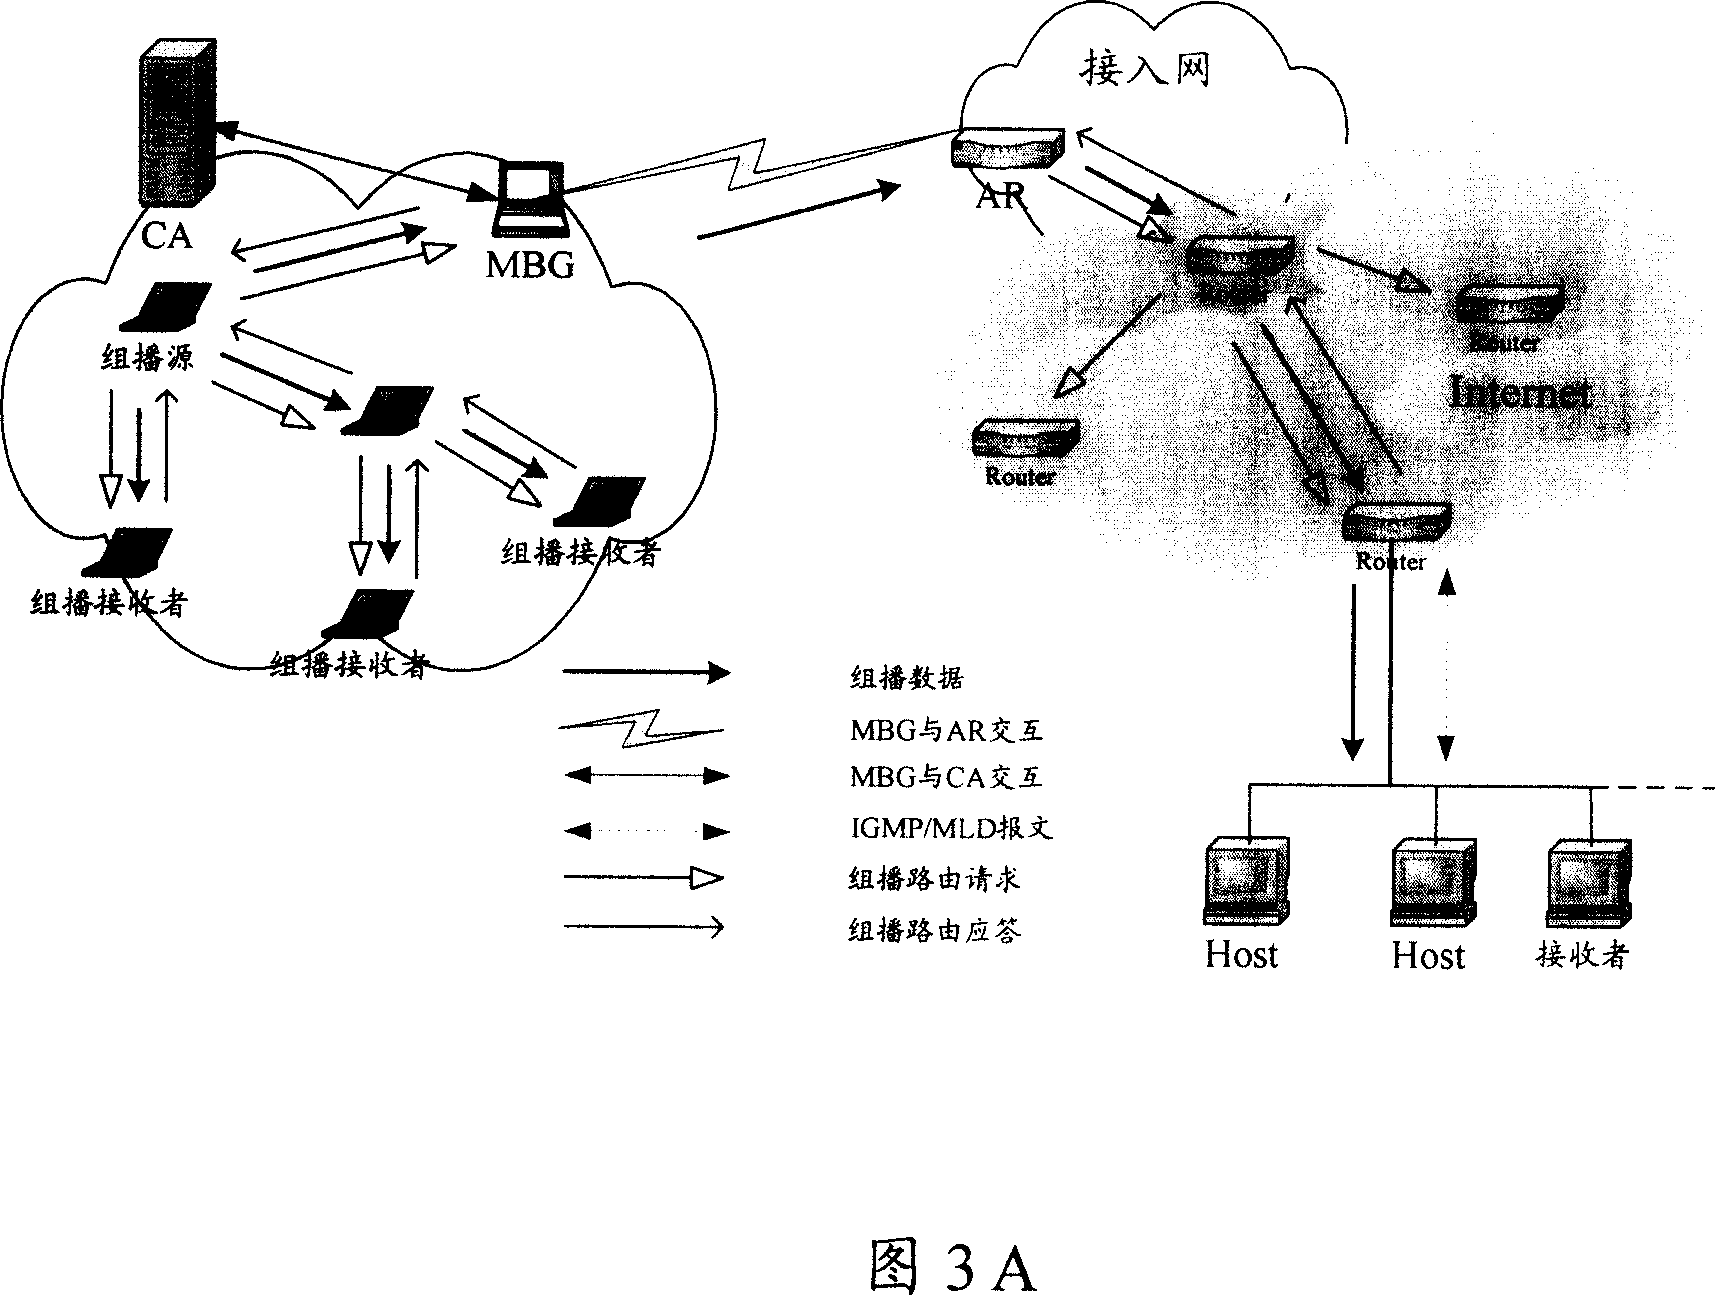 The method and system for realizing the cross-area multicast service between the self networking and fixed networks